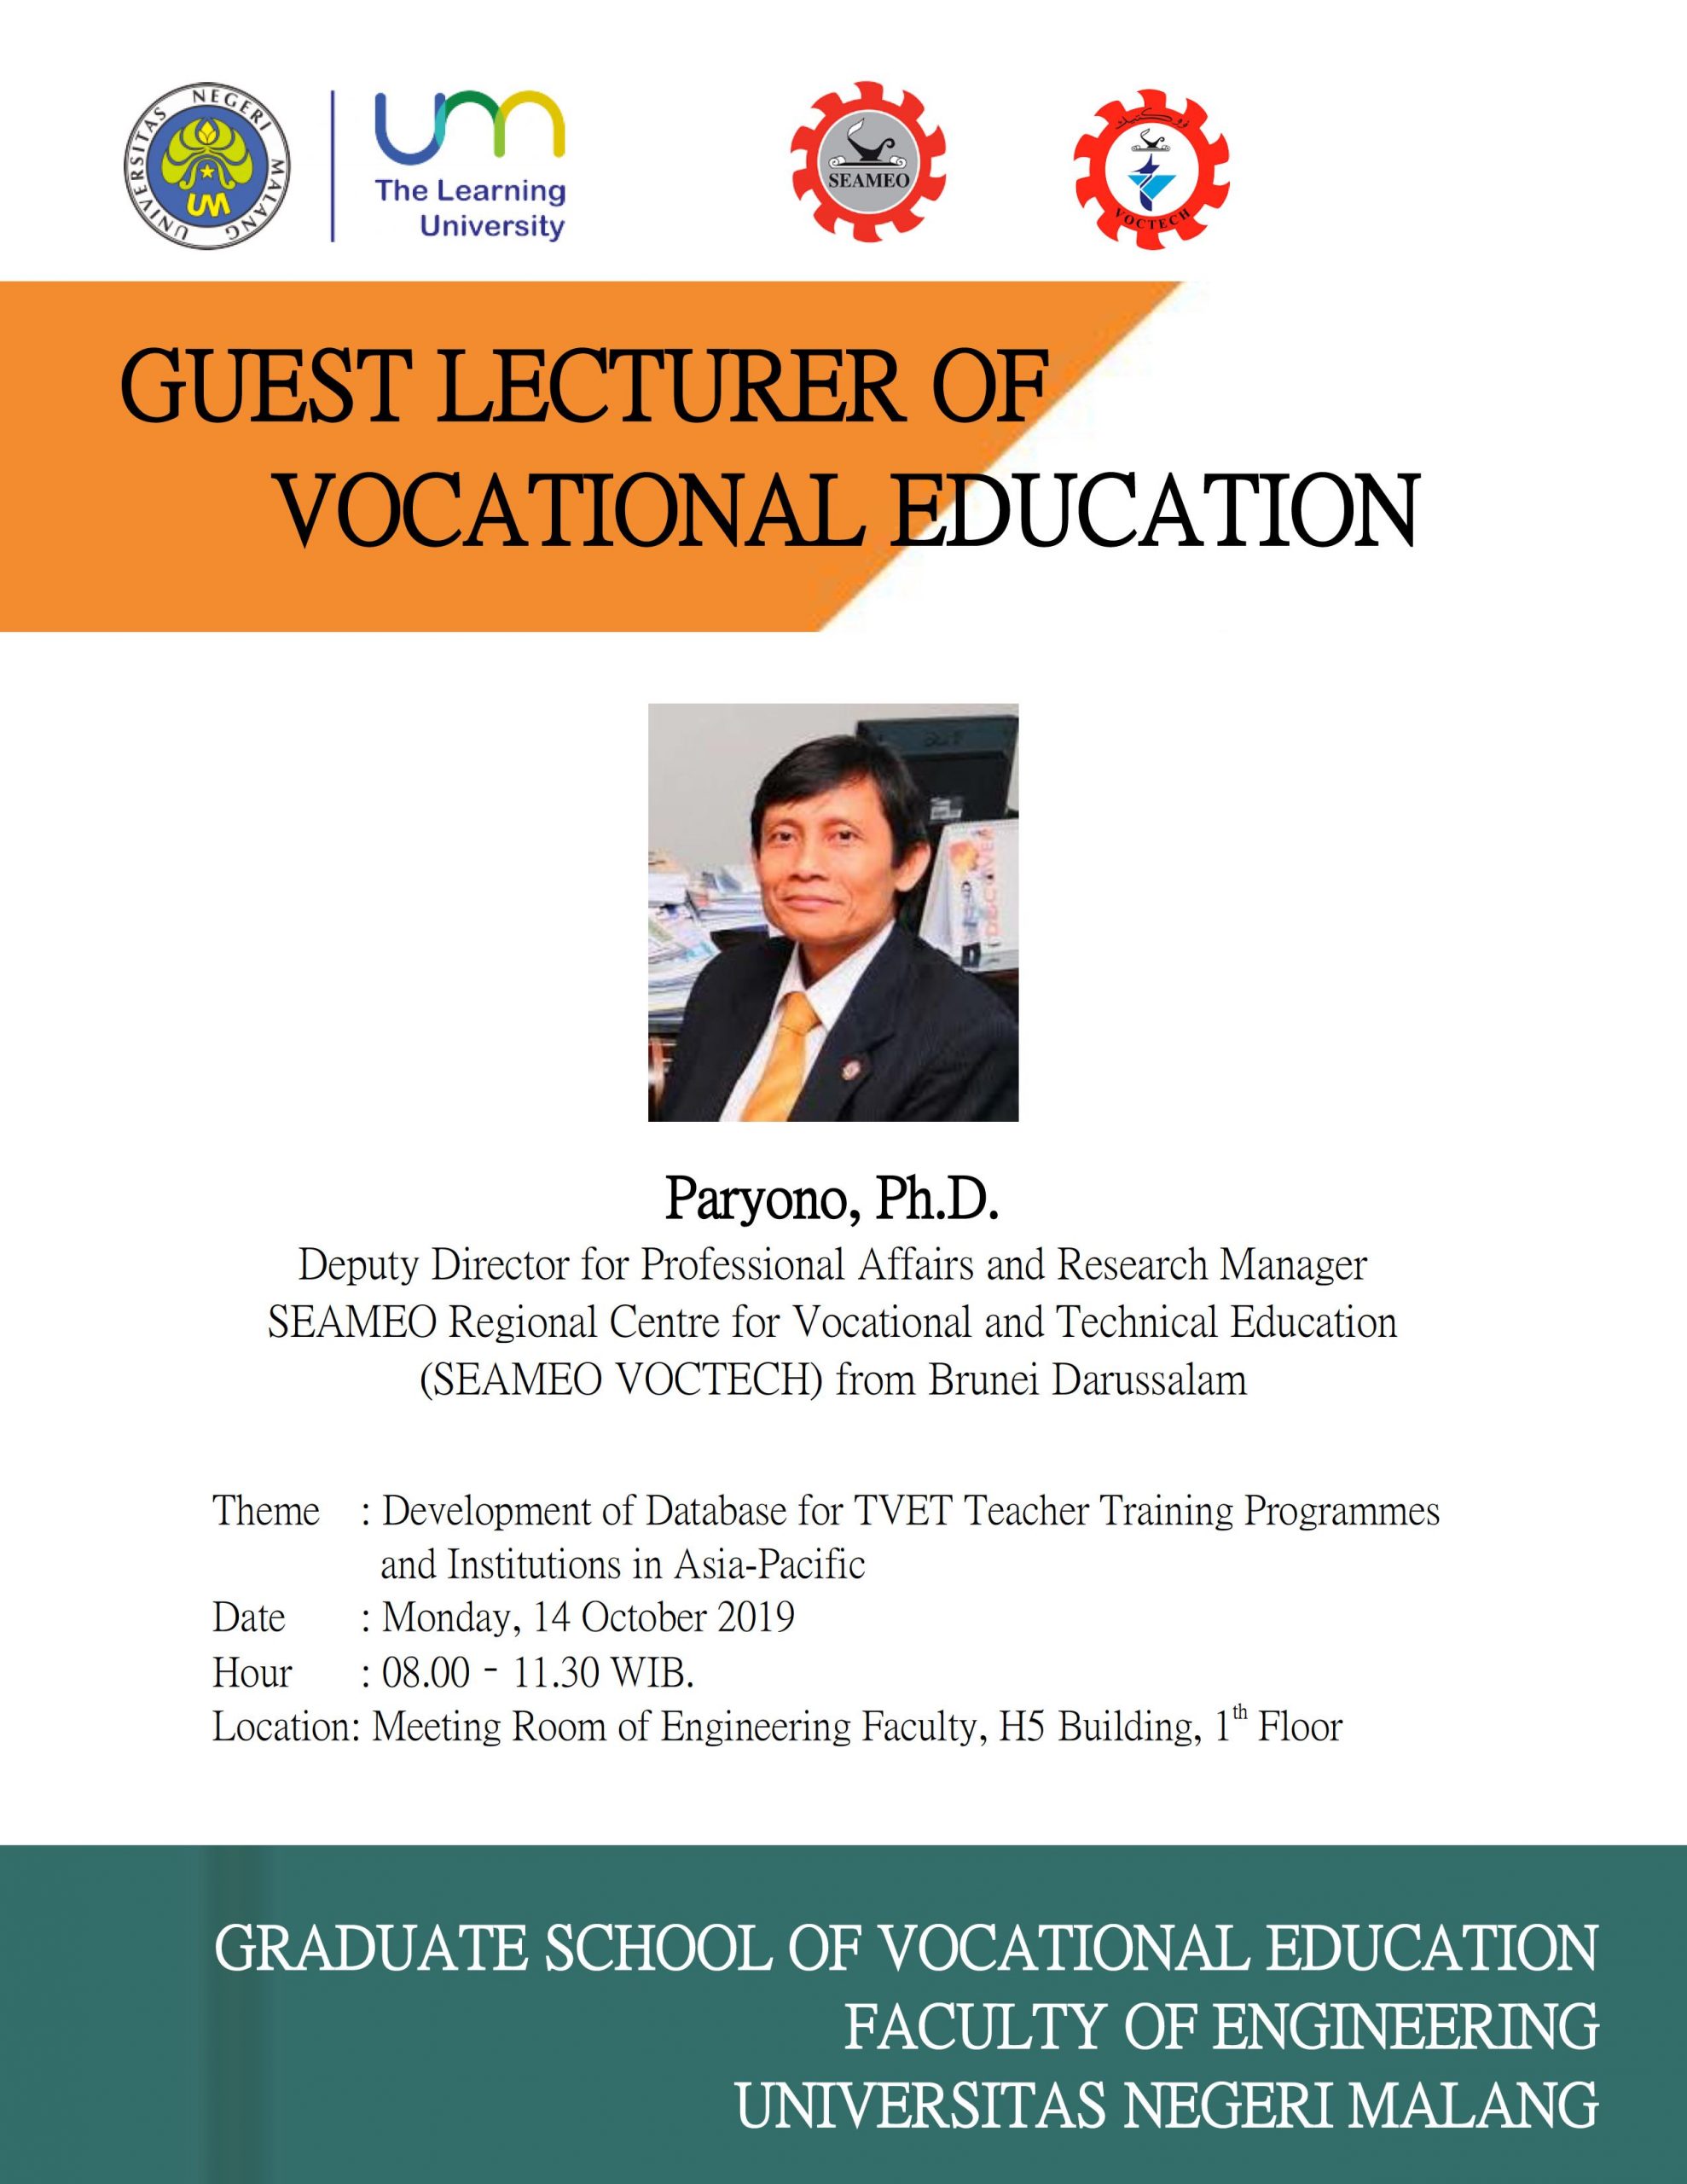 GUEST LECTURER OF VOCATIONAL EDUCATION with Theme Development of Database for TVET Teacher Training Programmes and Institutions in Asia-Pacific